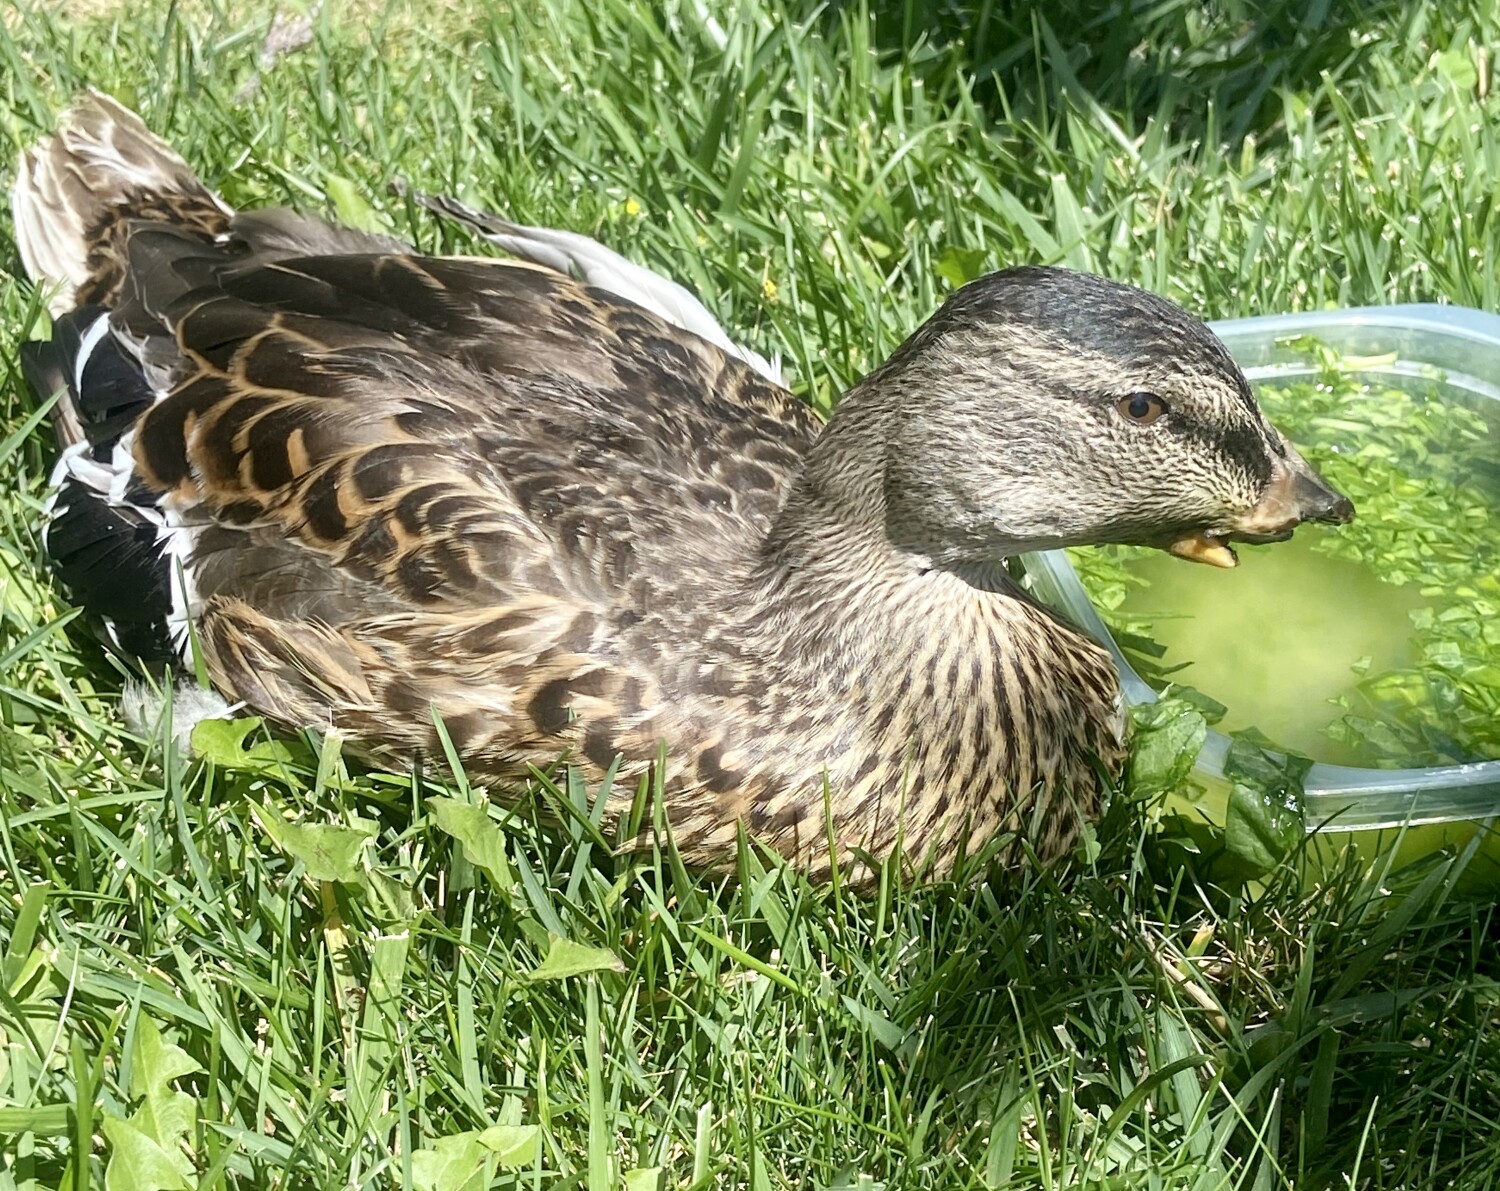 Third duck with beak removed is found in Fountain Valley park; animal activists fear it's intentional